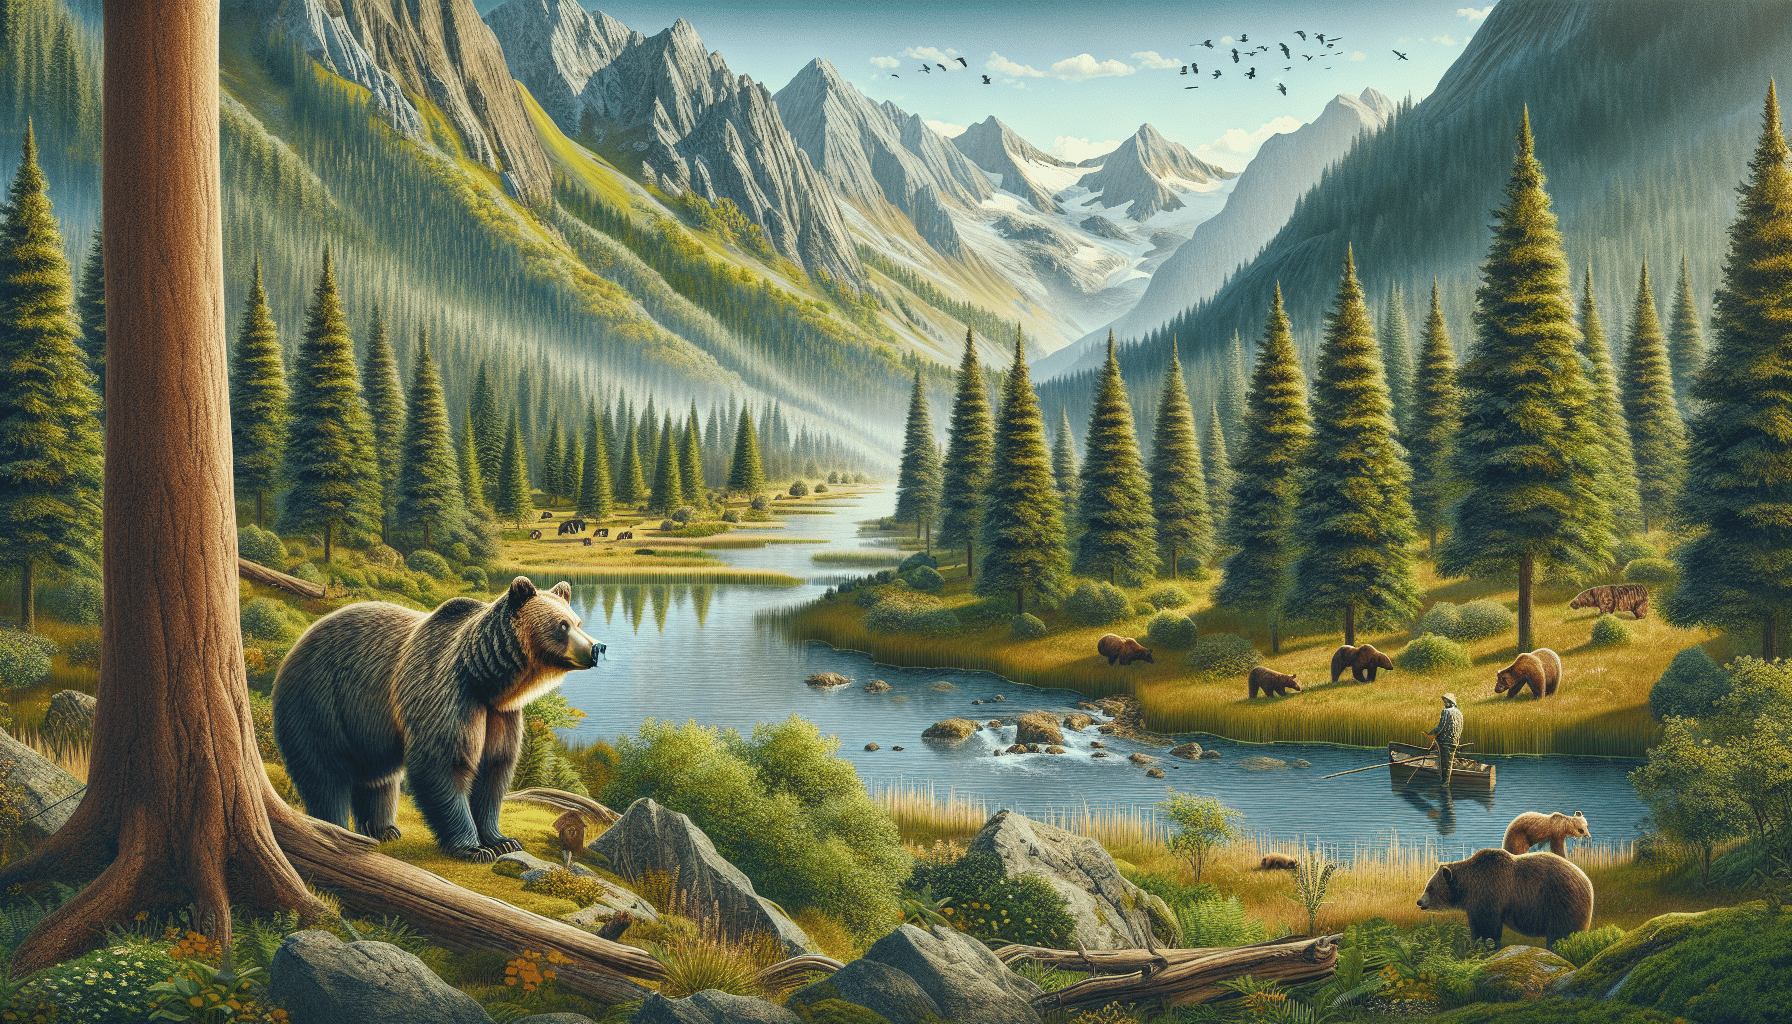 Create an image showing the natural habitats of brown bears without any human presence. The picture should depict a diverse variety of climates where brown bears are typically found, such as mountainous forests, expansive meadows and riversides for fishing. No text or brand names should be present in the scene. The emphasis should be on the environments to show where these majestic animals live and thrive. Do not return any text within the image or on items and do not include any brand names or logos.